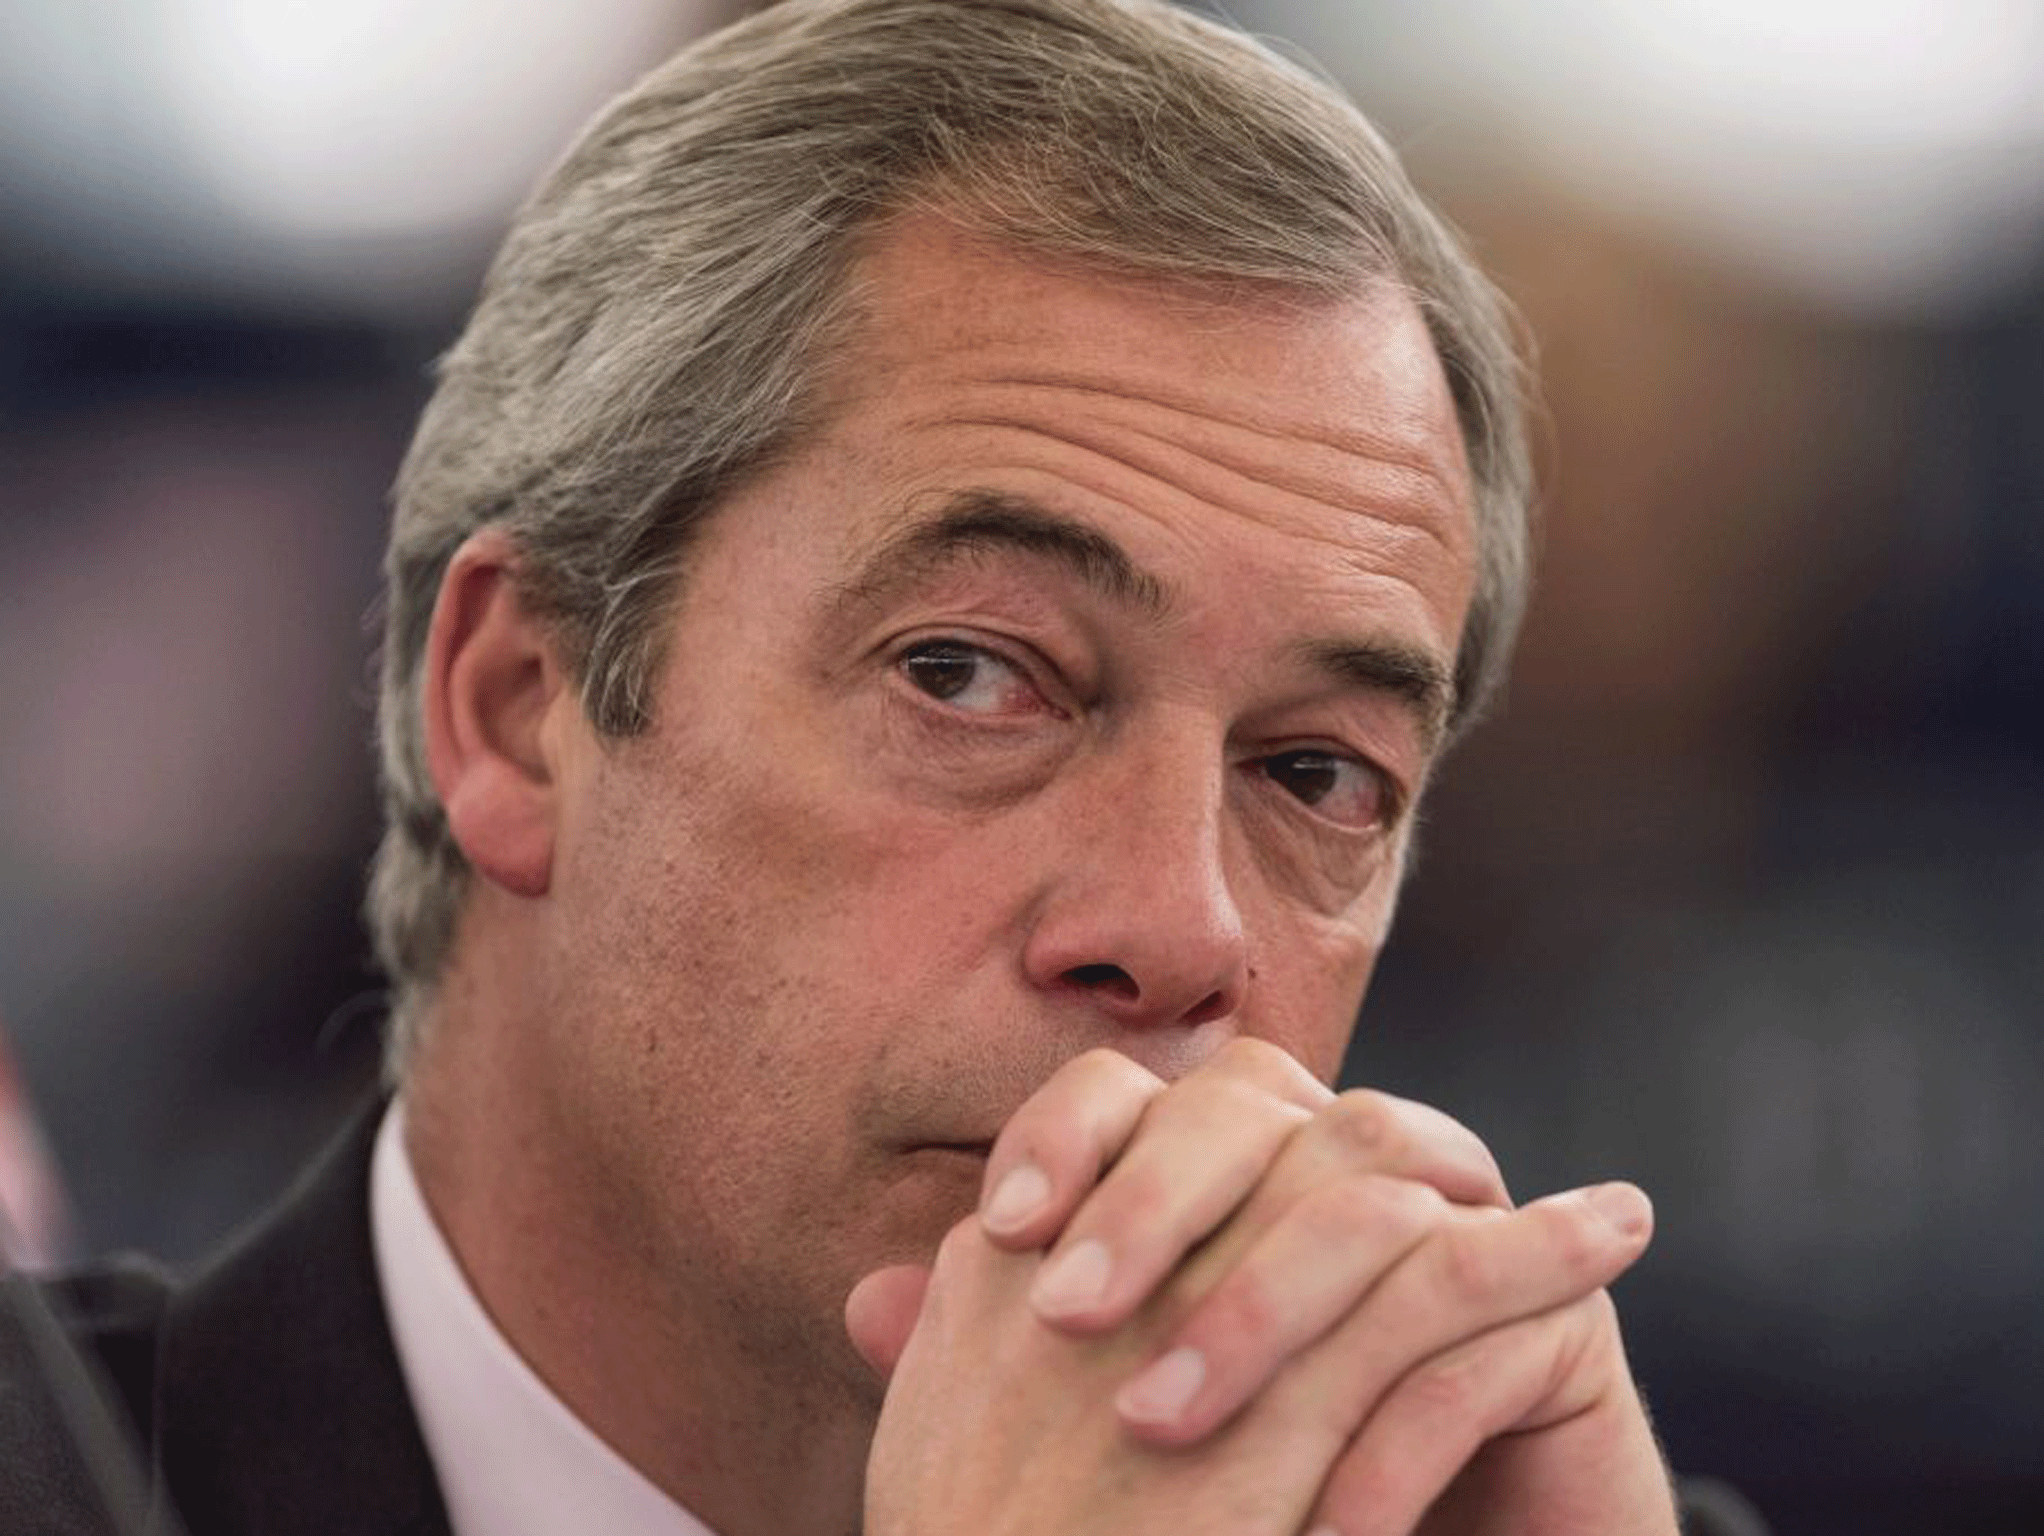 Nigel Farage 'due to travel to US where he is likely to meet Trump' 